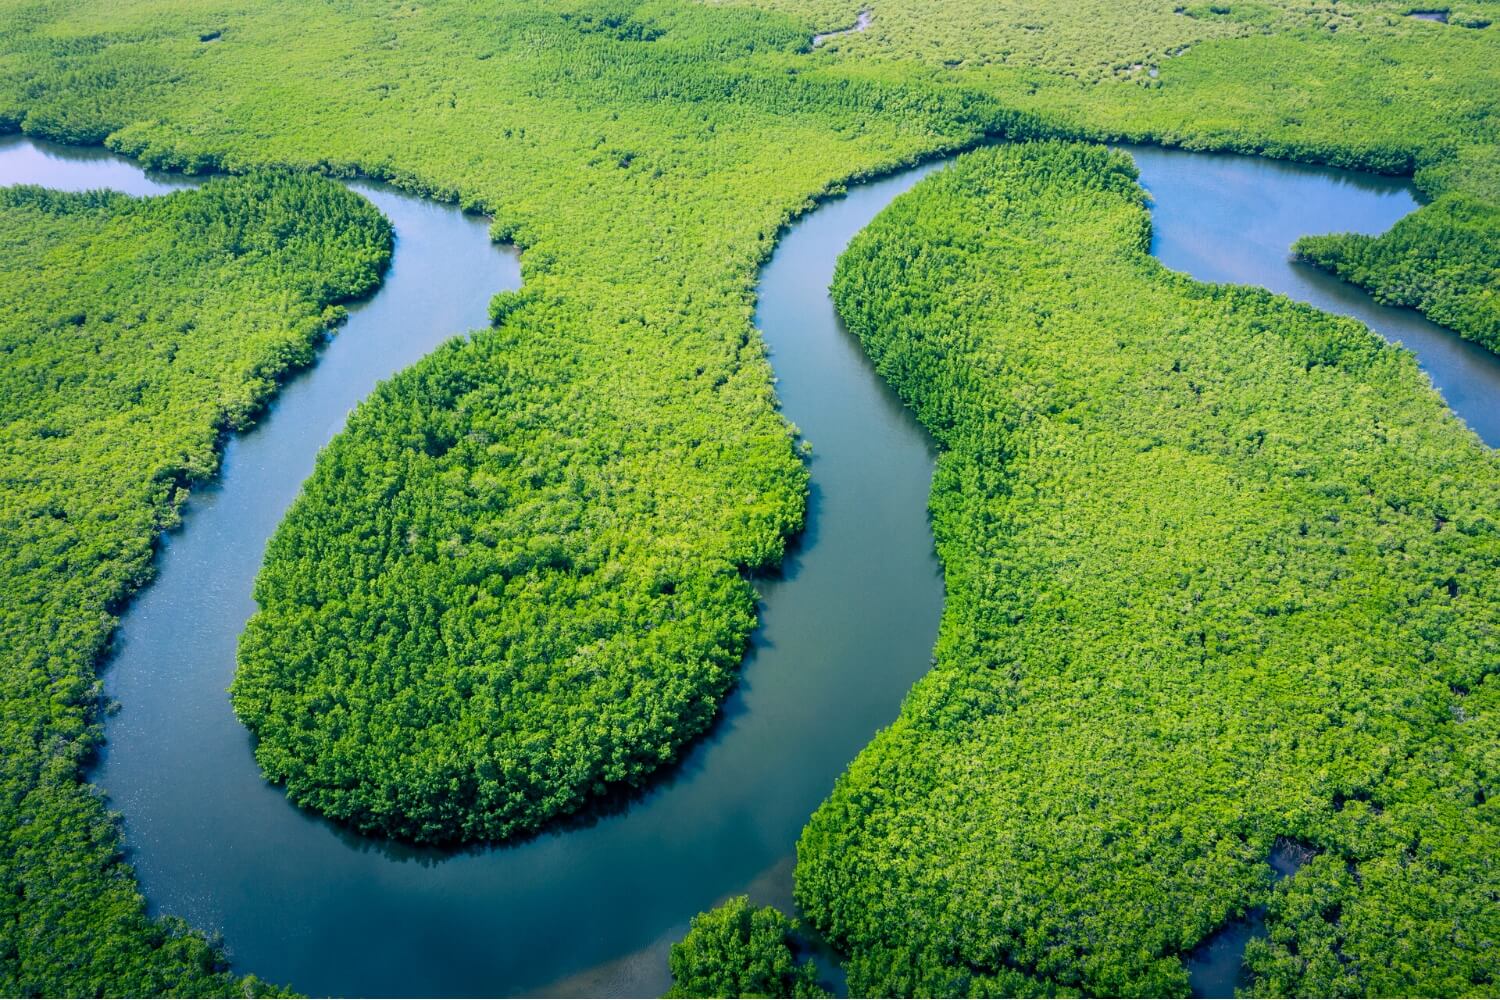 WHAT IS THE PERUVIAN AMAZON RAINFOREST?